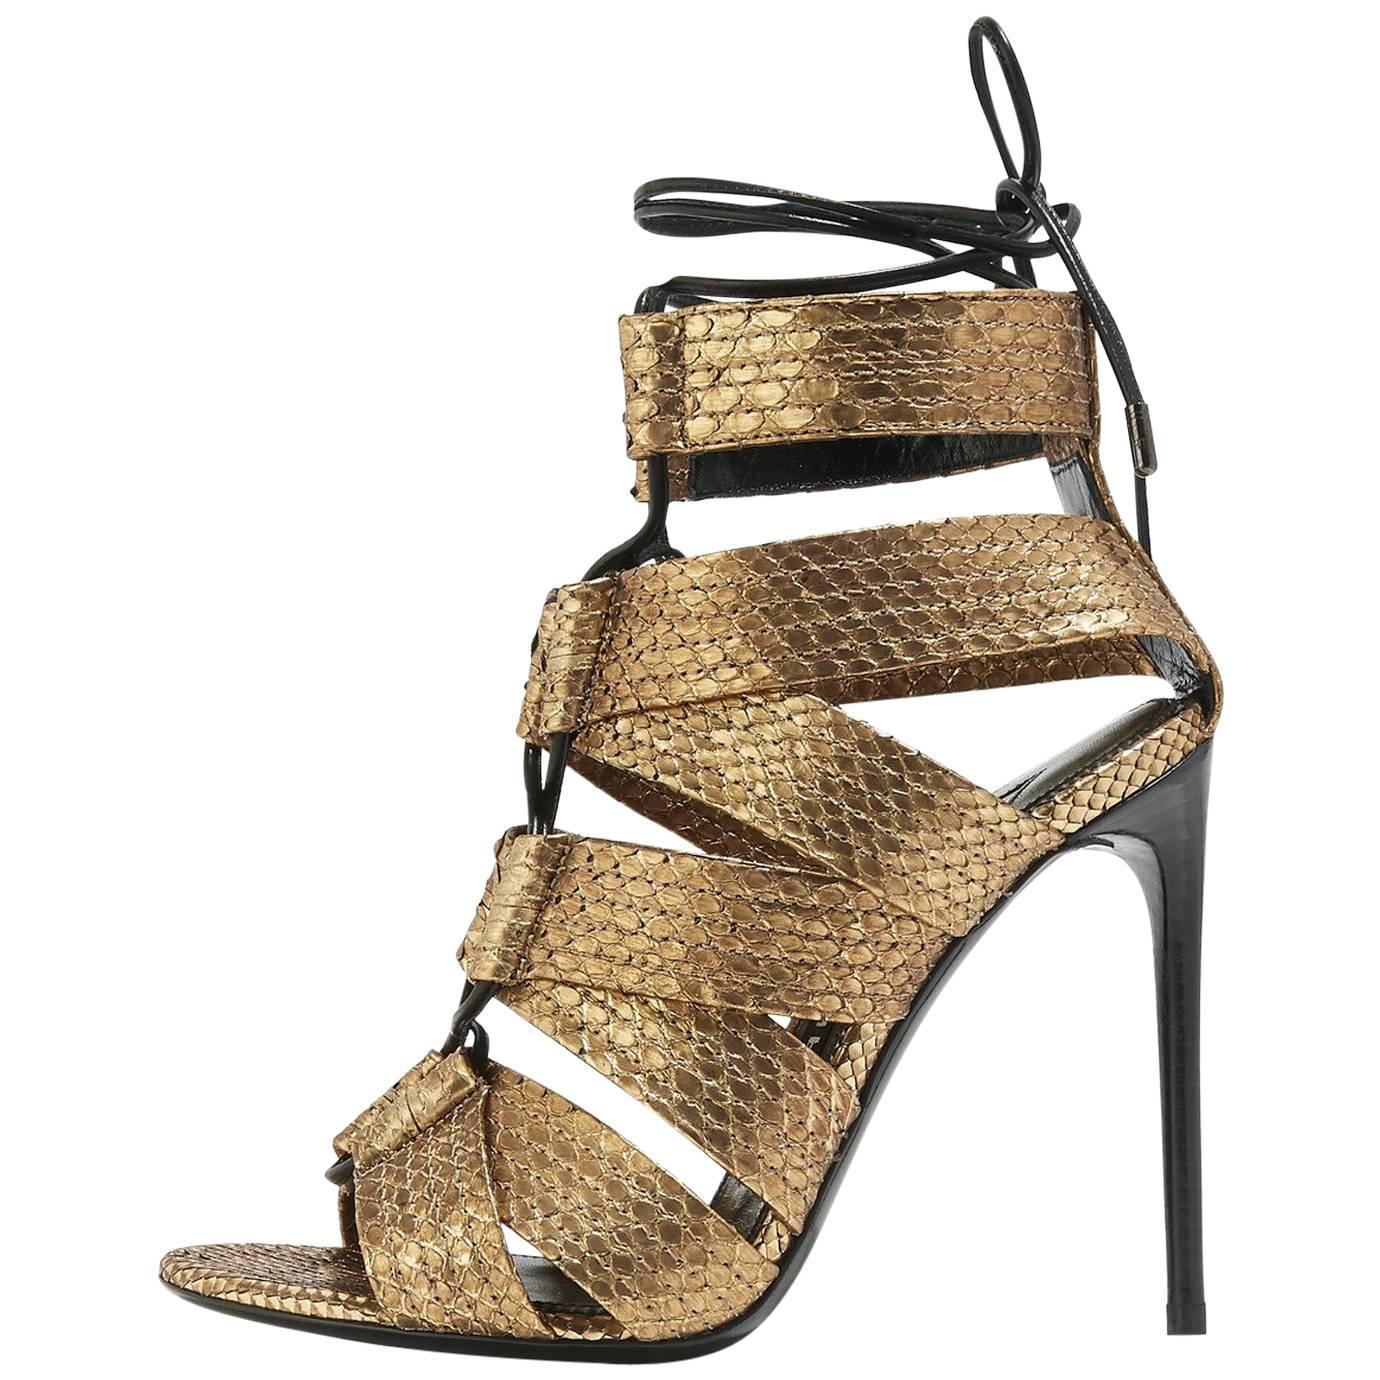 Tom Ford New Sold Out Bronze Snakeskin Cut Out Evening Sandals Heels in Box